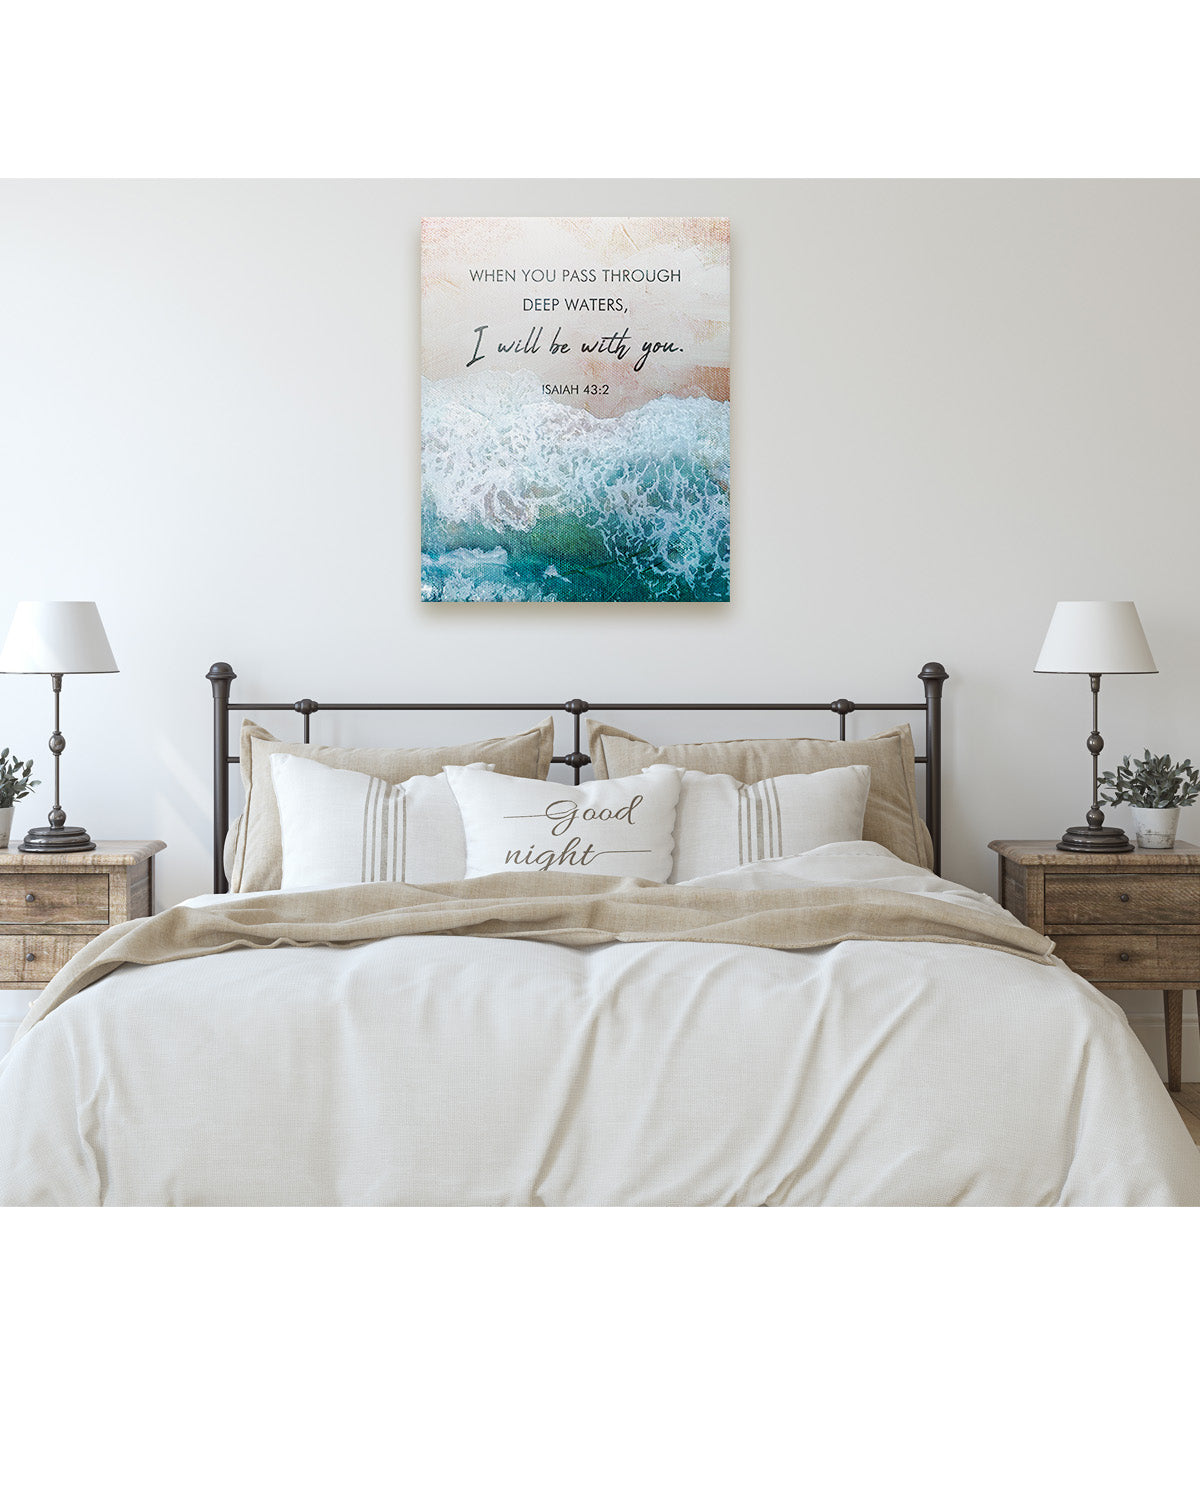 Govivo I Will Be With You Isaiah 43:2 Bible Verse - Christian Wall Art - Minimalist Watercolor Religious Scriptures Wall Decor - Farmhouse Decor